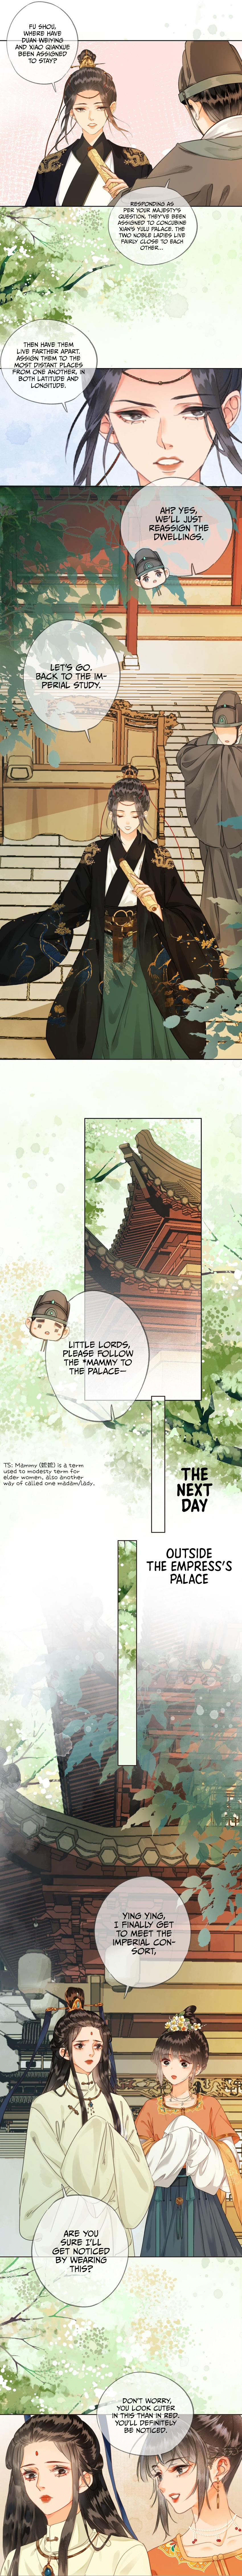 Fall In Love With The Empress - Page 2